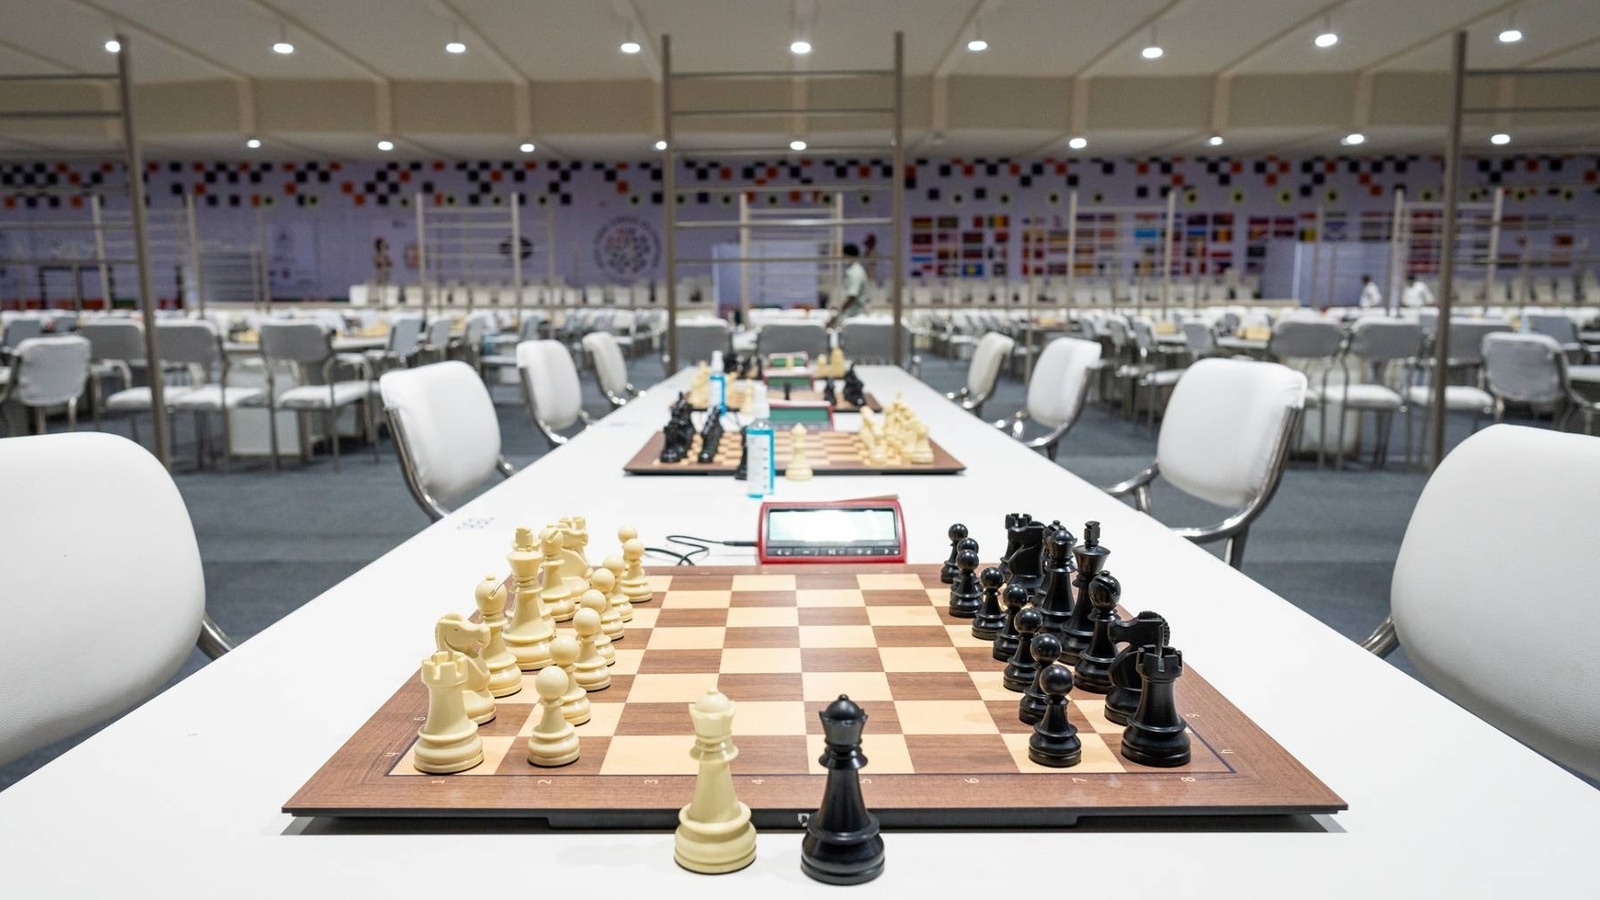 Chennai wins right to host 2022 Chess Olympiad